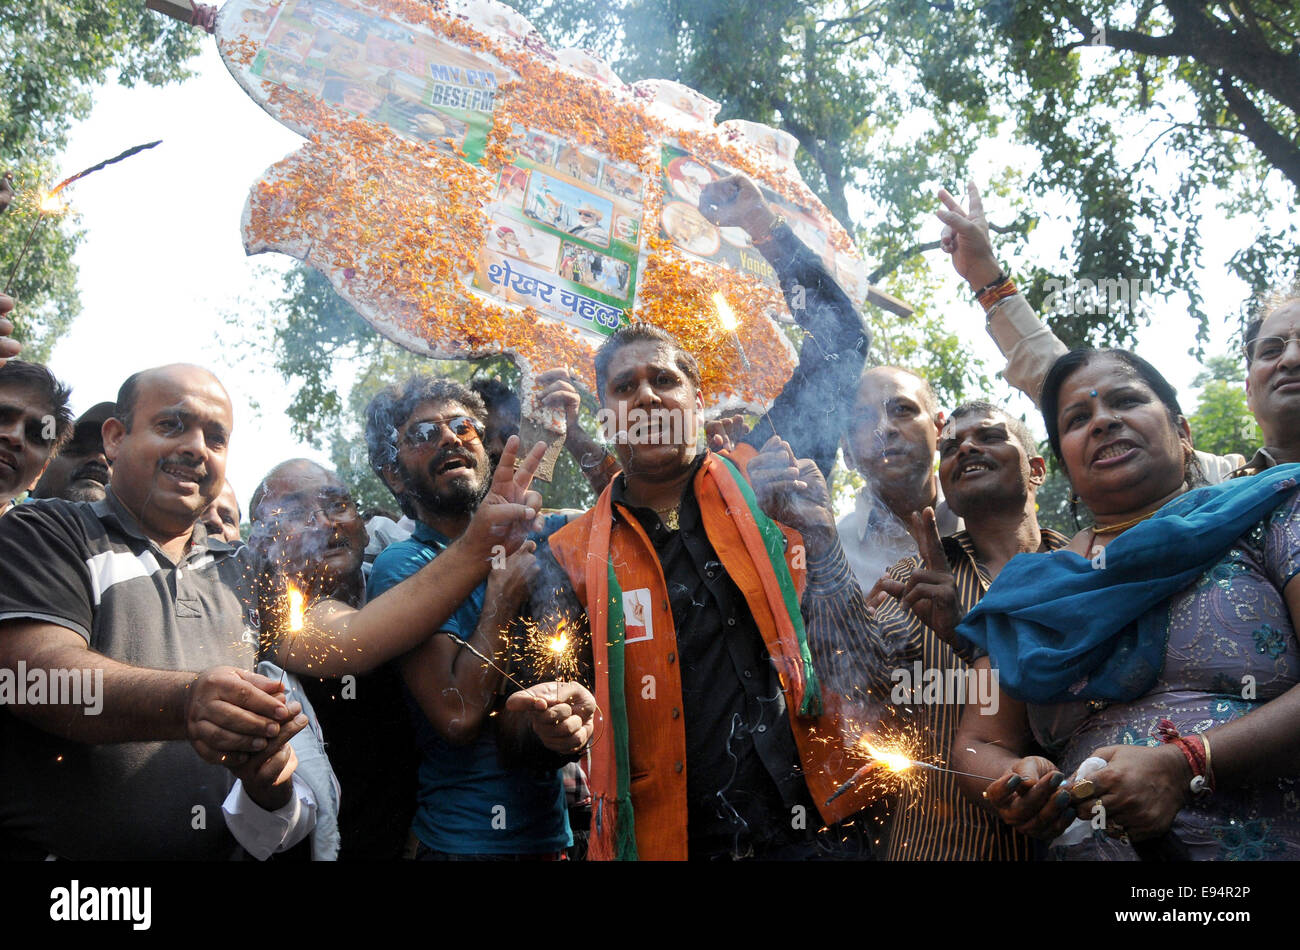 New Delhi. 19th Oct, 2014. Bharatiya Janata Party (BJP) supporters celebrate outside the BJP headquarters as Haryana and Maharashtra states assembly elections results come out in New Delhi, India on Oct.19, 2014. India's ruling BJP has won control of the country's financial capital Mumbai through a legislative election in the state of Maharashtra, while also grasping the northern state of Haryana from the Congress, said vote counting results Sunday. Credit:  Partha Sarkar/Xinhua/Alamy Live News Stock Photo